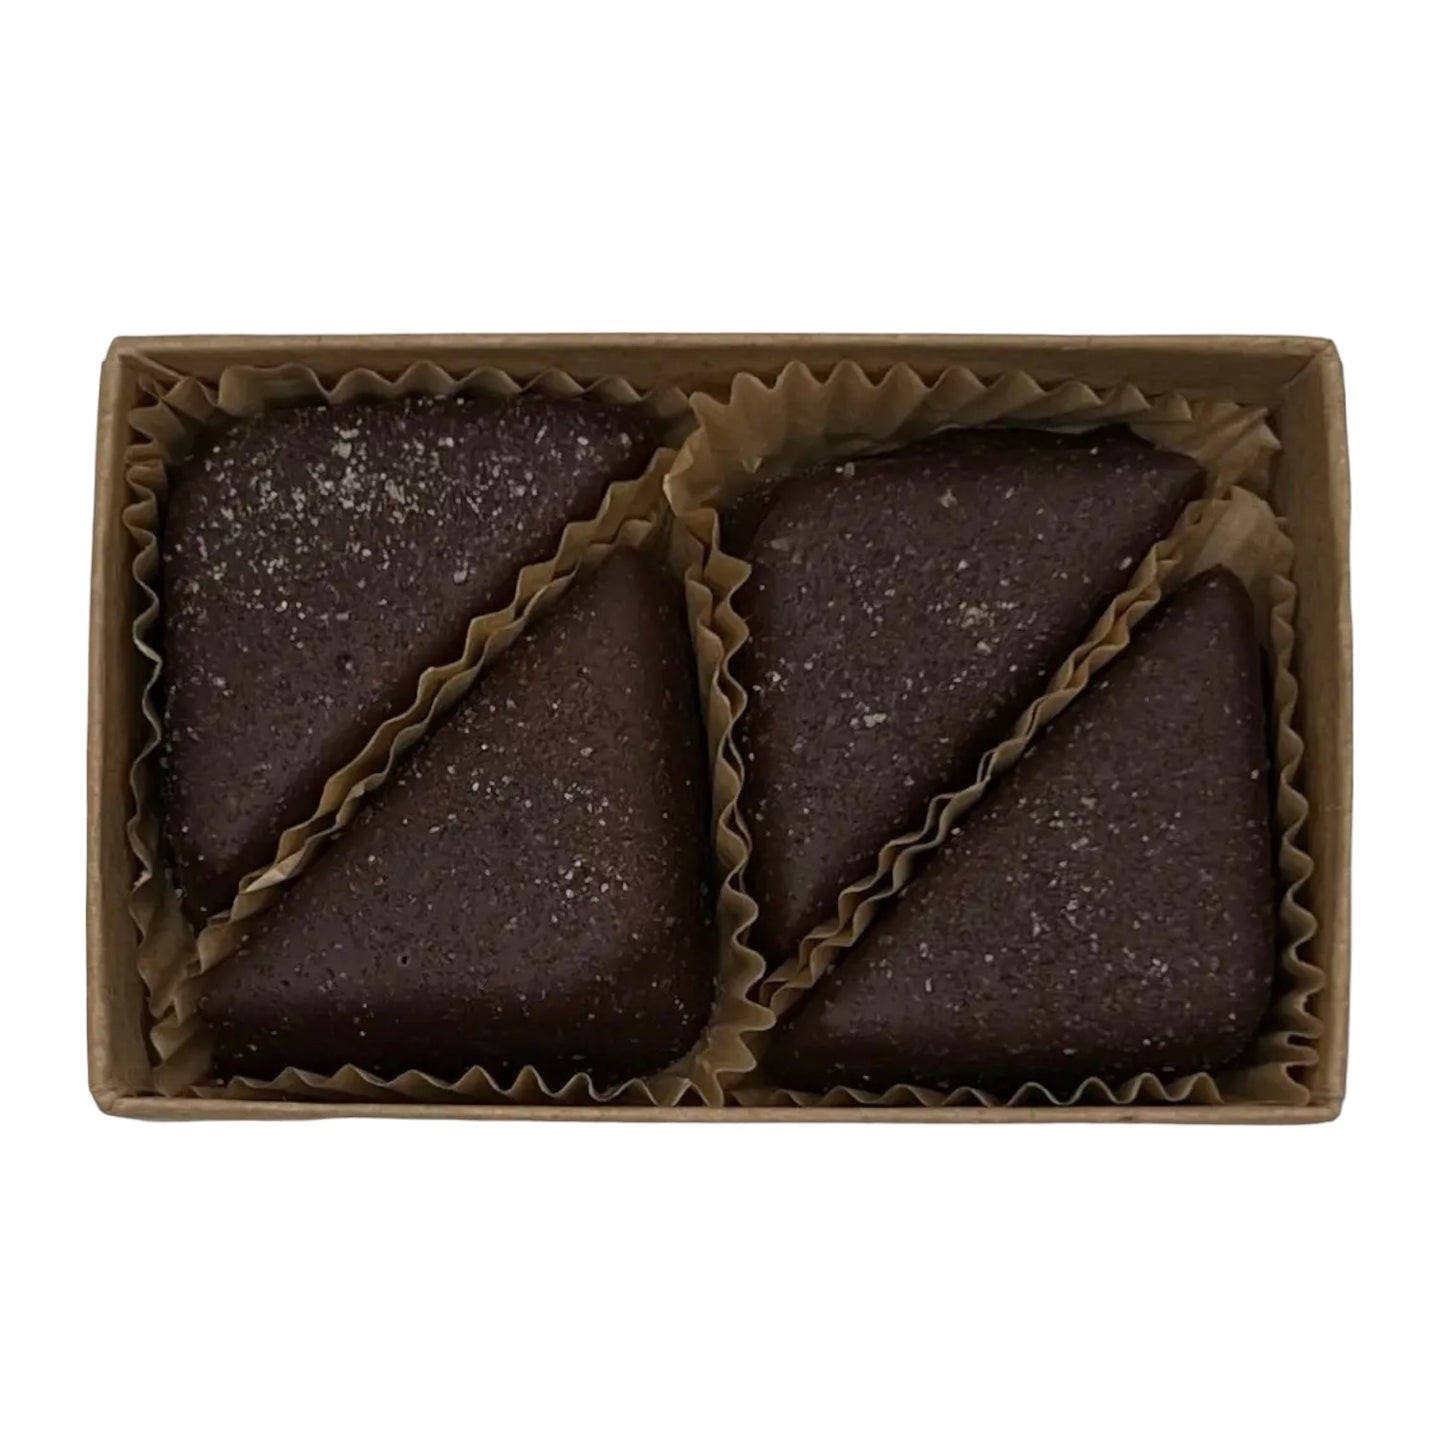 An open box of Vanilla and Salt chocolate truffles from Missionary Chocolates